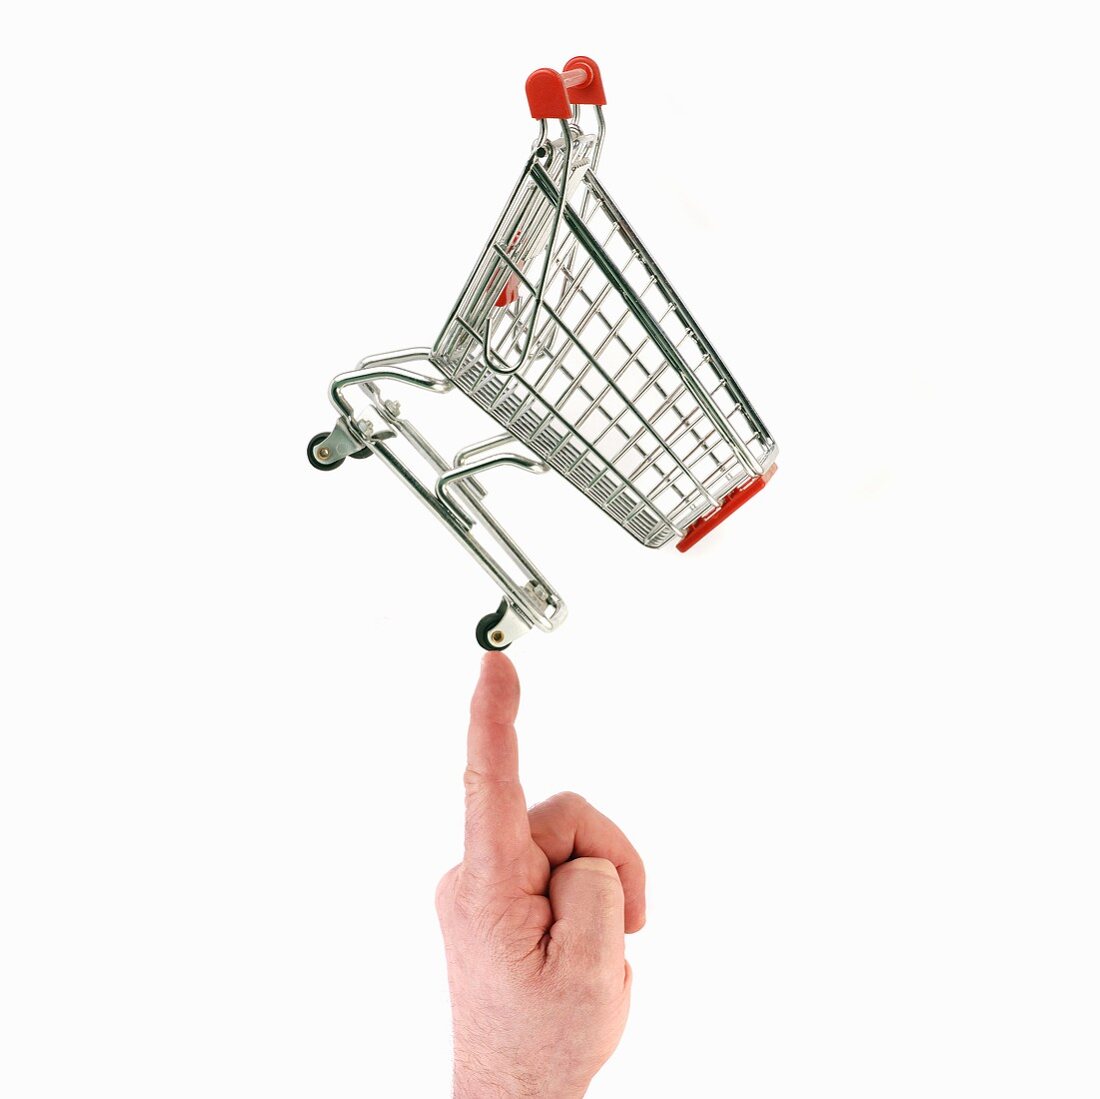 Shopping trolley on the tip of someone's finger